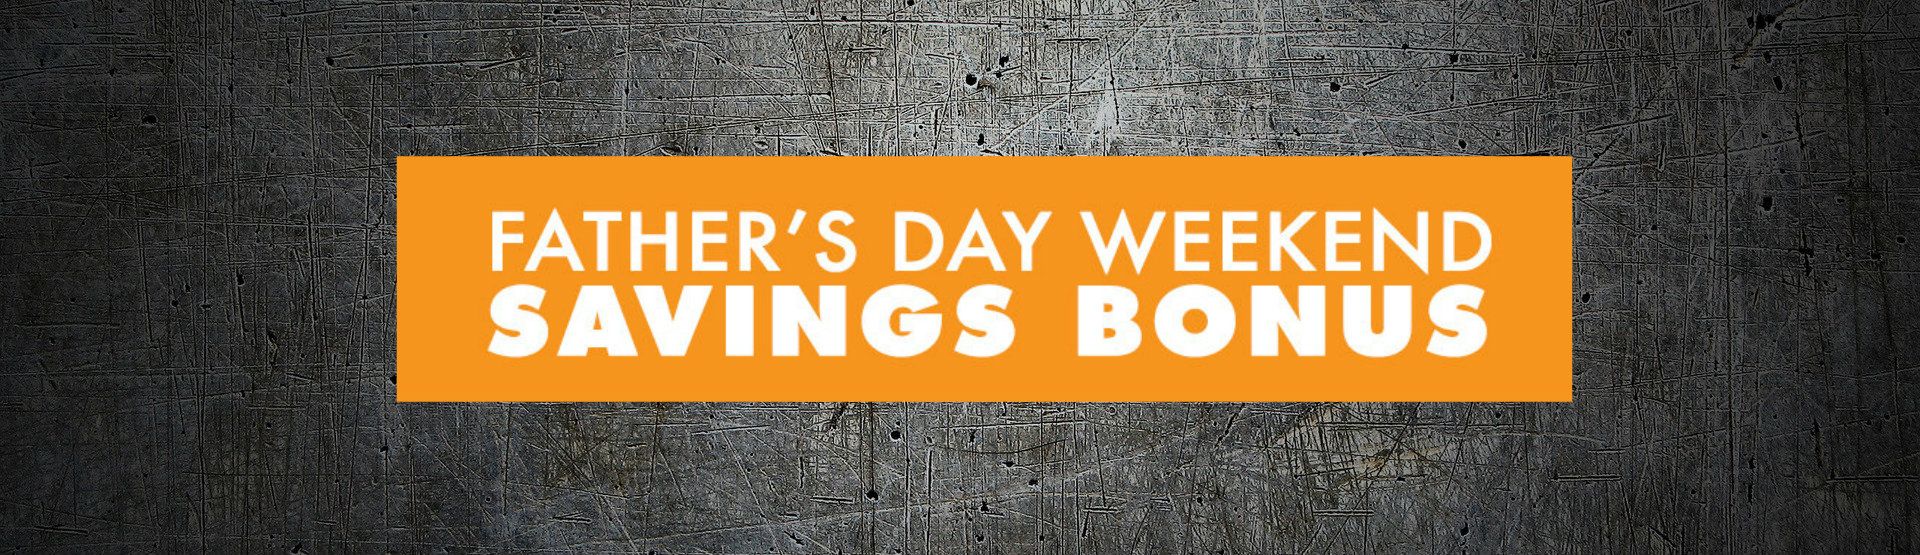 Double Reward Points Father's Day Weekend